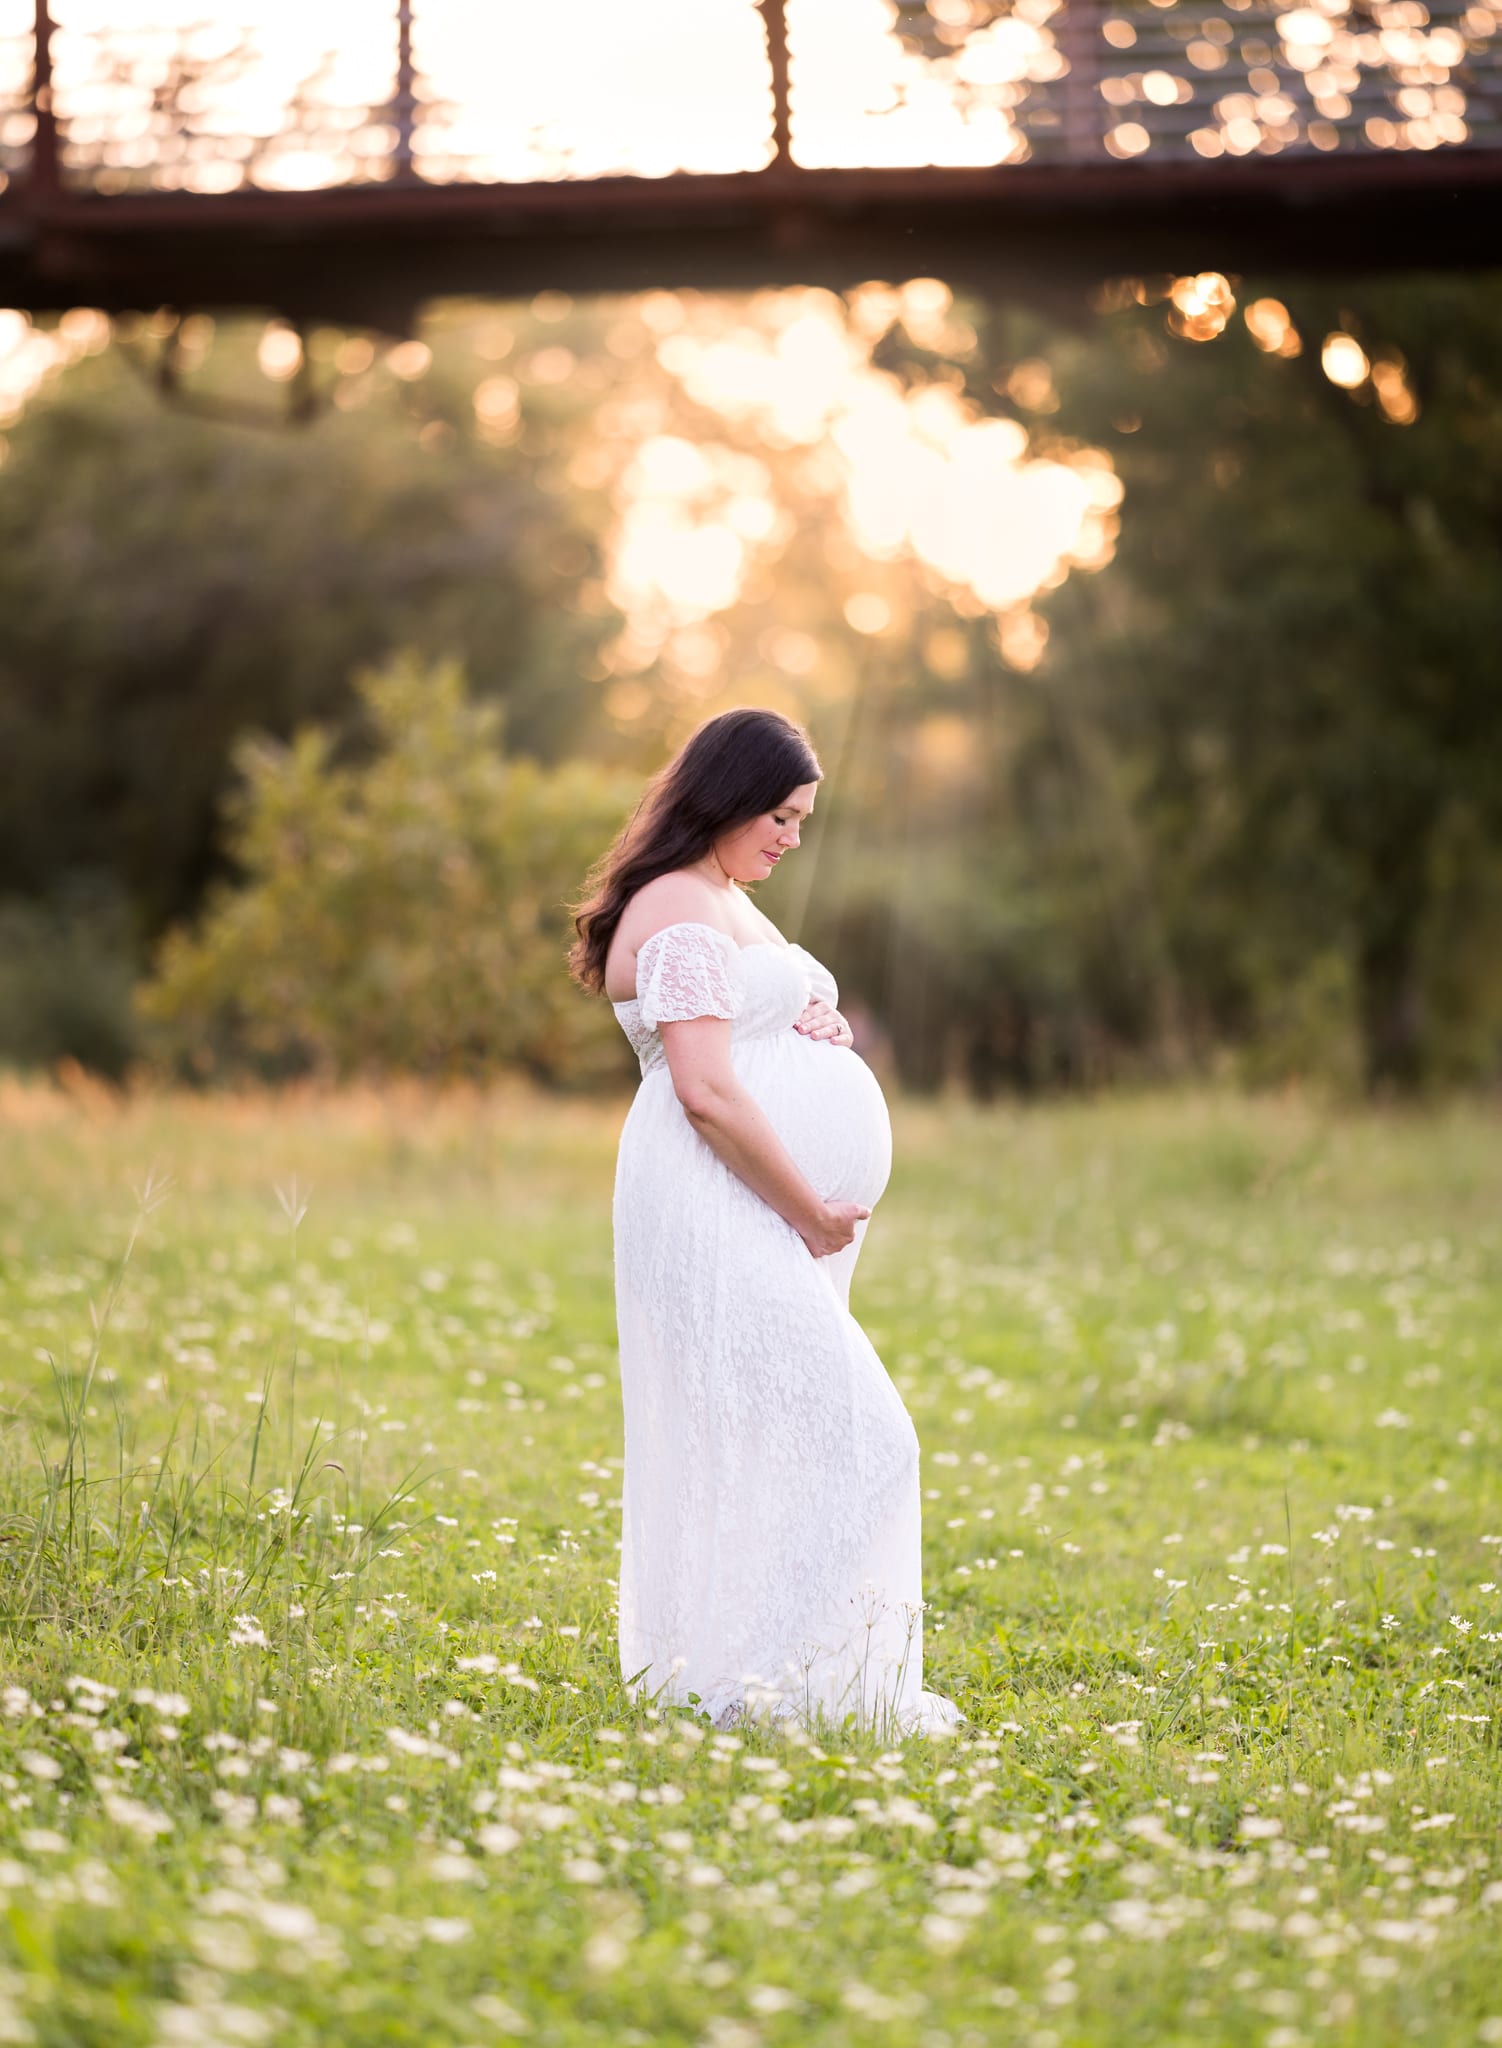 The Best Spots For Spring Maternity Photos